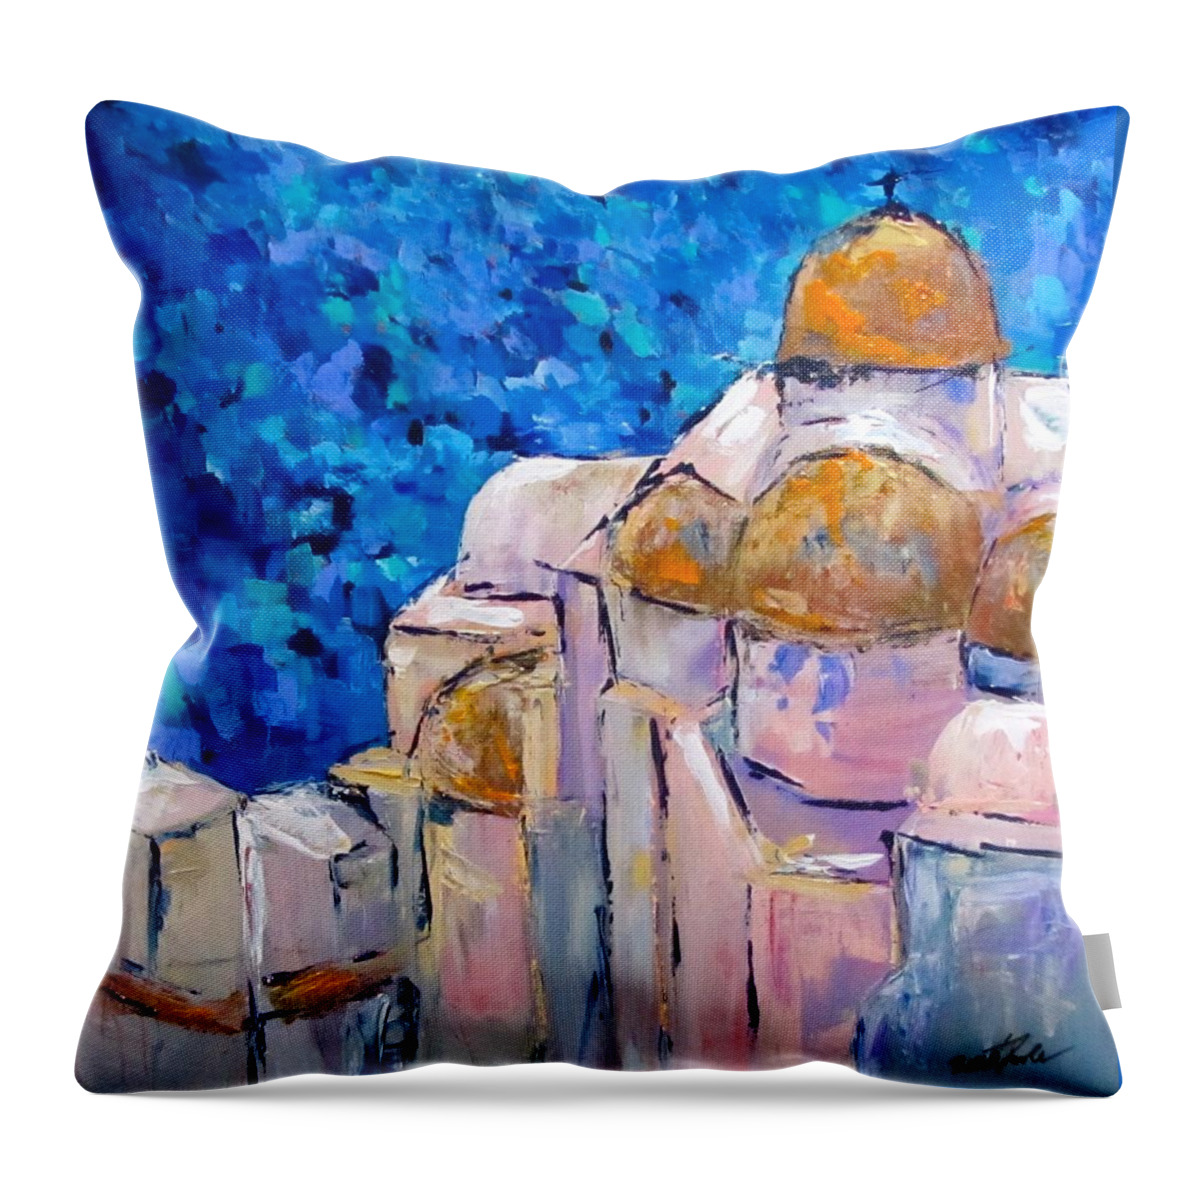 Sea Throw Pillow featuring the painting Santorini by Barbara O'Toole